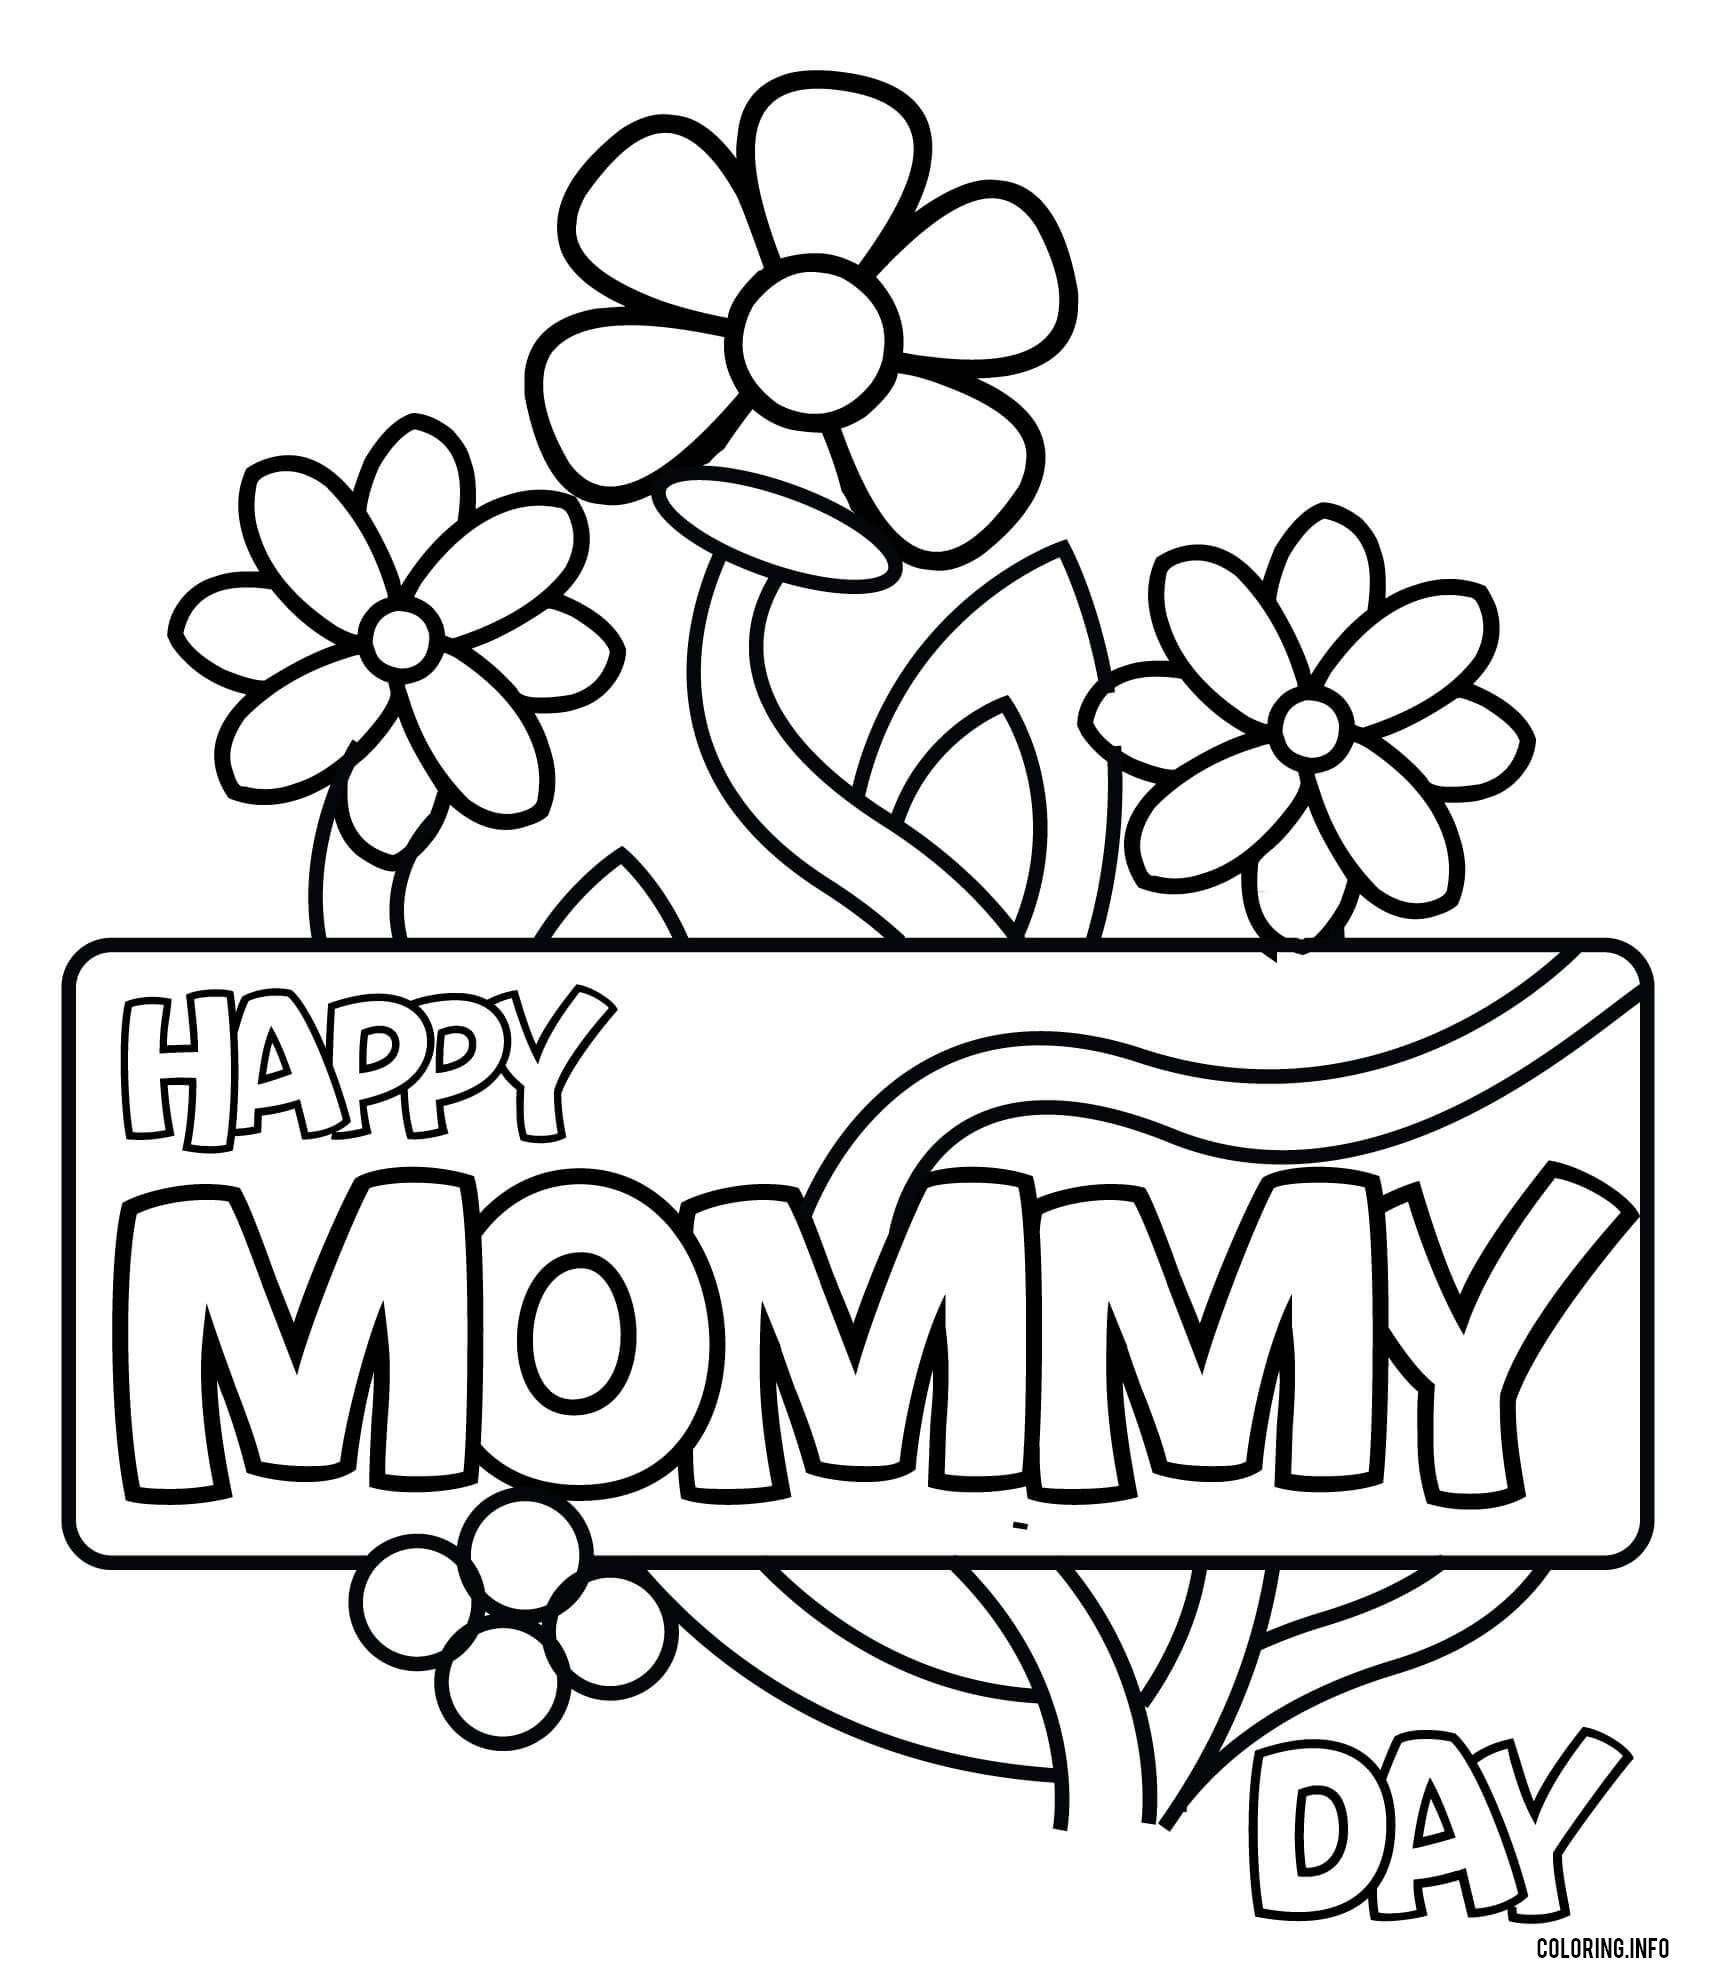 Happy Mommy Day Flowers coloring